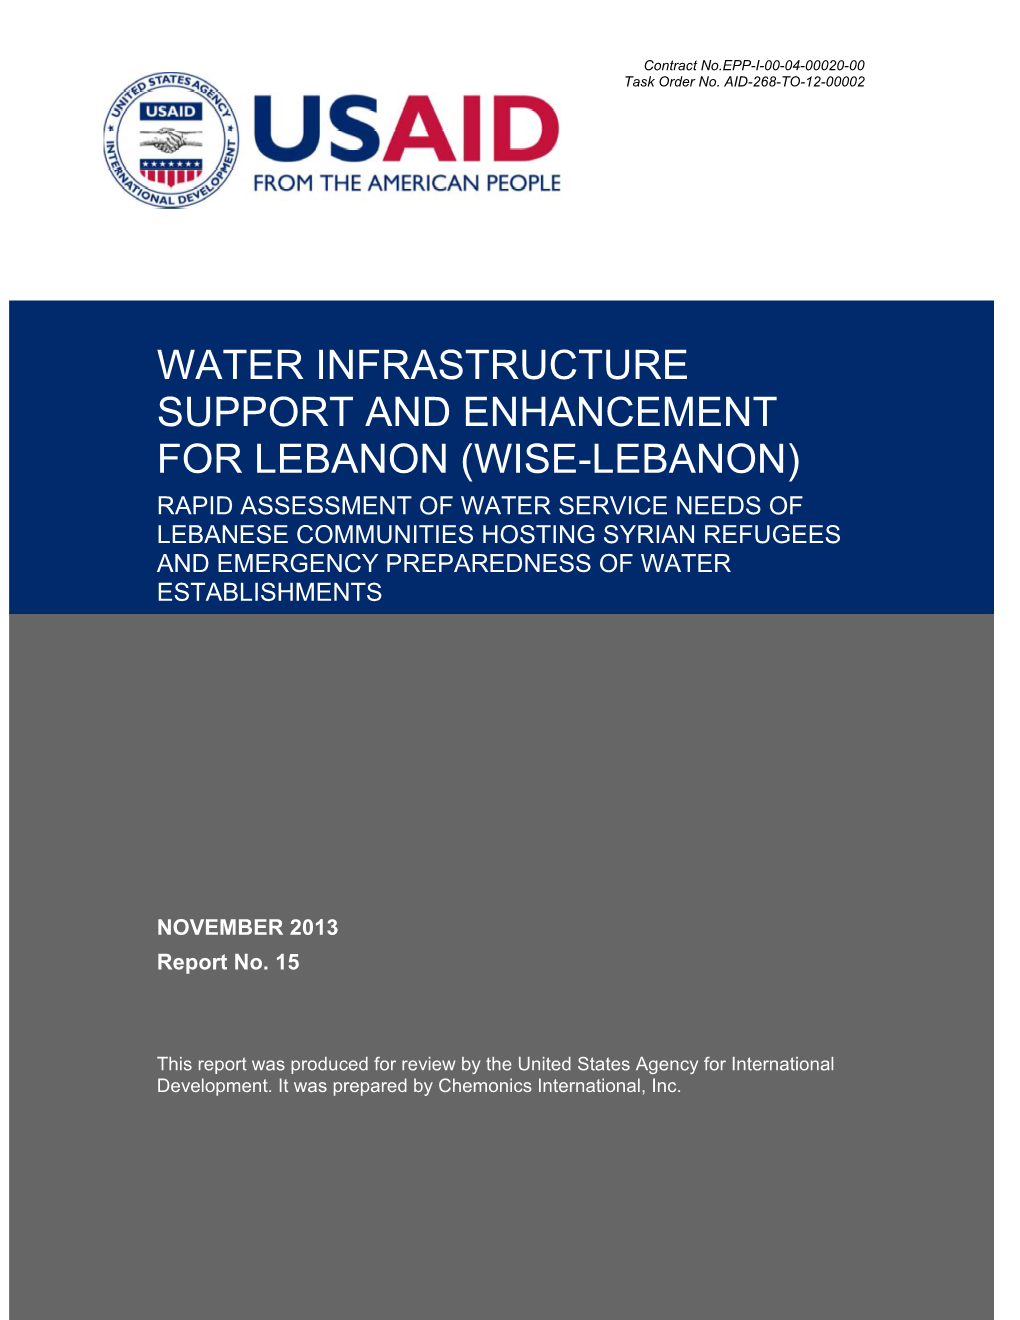 Wise-Lebanon) Rapid Assessment of Water Service Needs of Lebanese Communities Hosting Syrian Refugees and Emergency Preparedness of Water Establishments